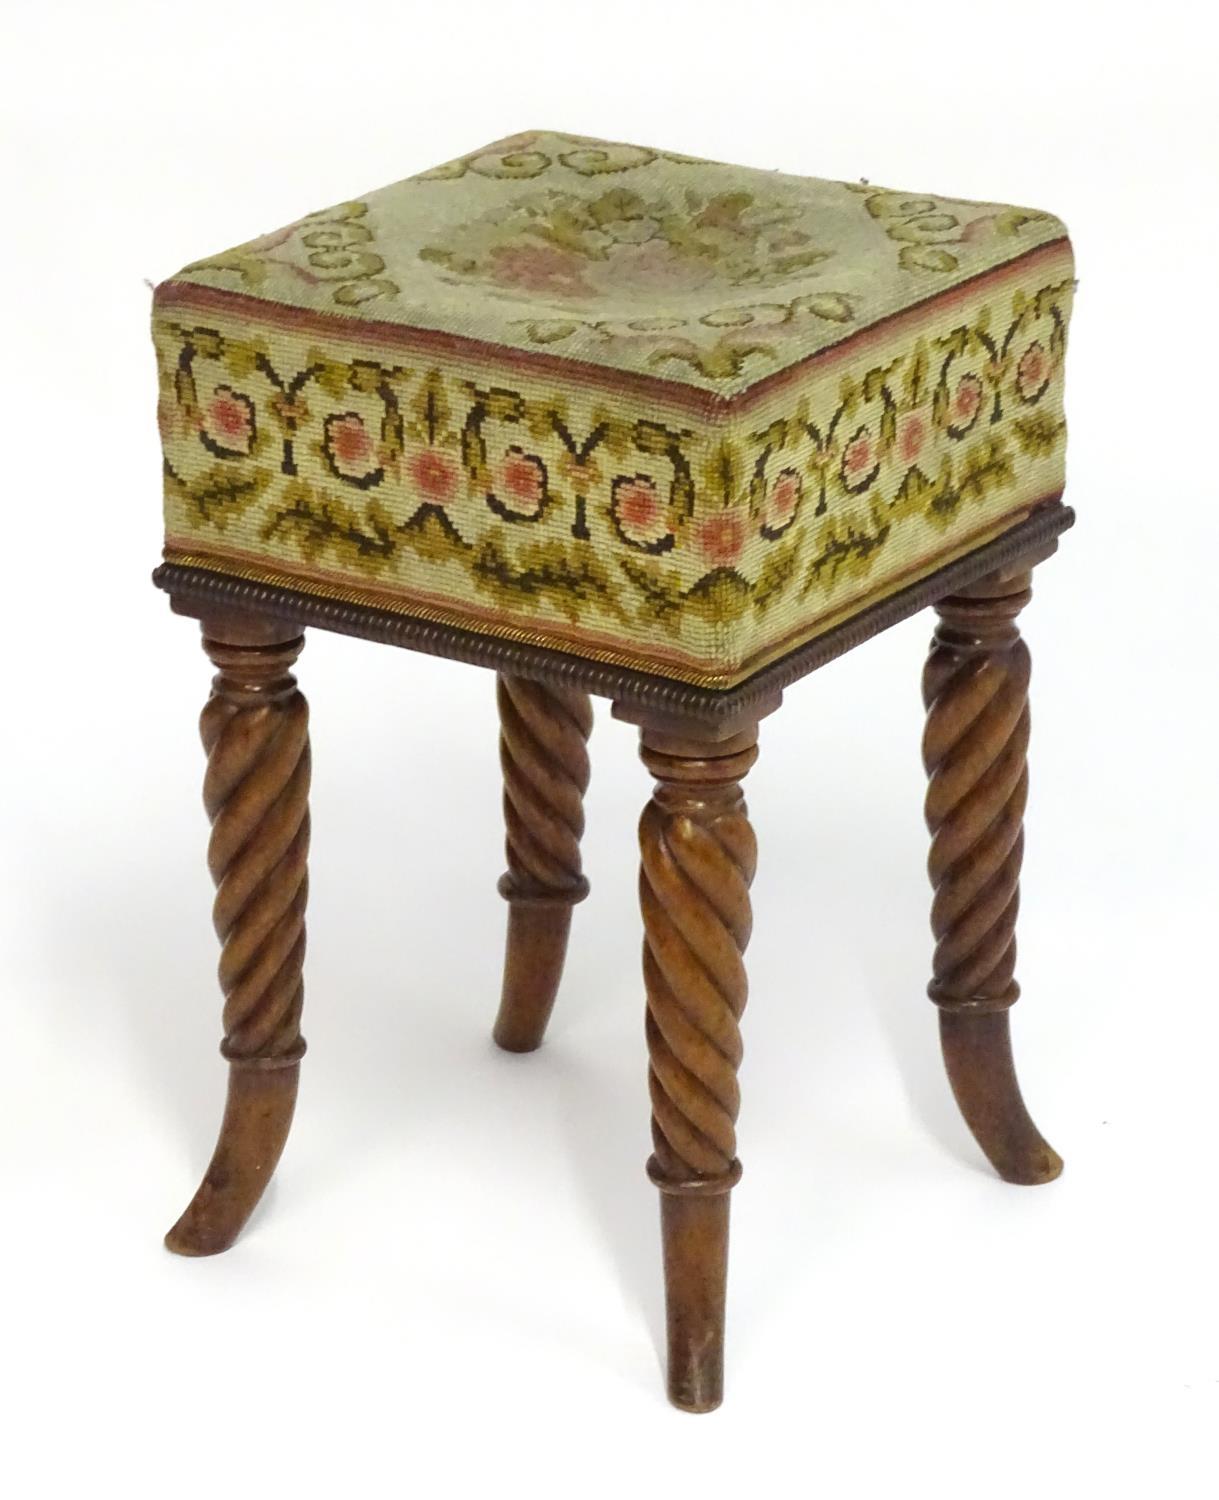 A Regency mahogany stool with a needlework squared top above four rope twist legs terminating in